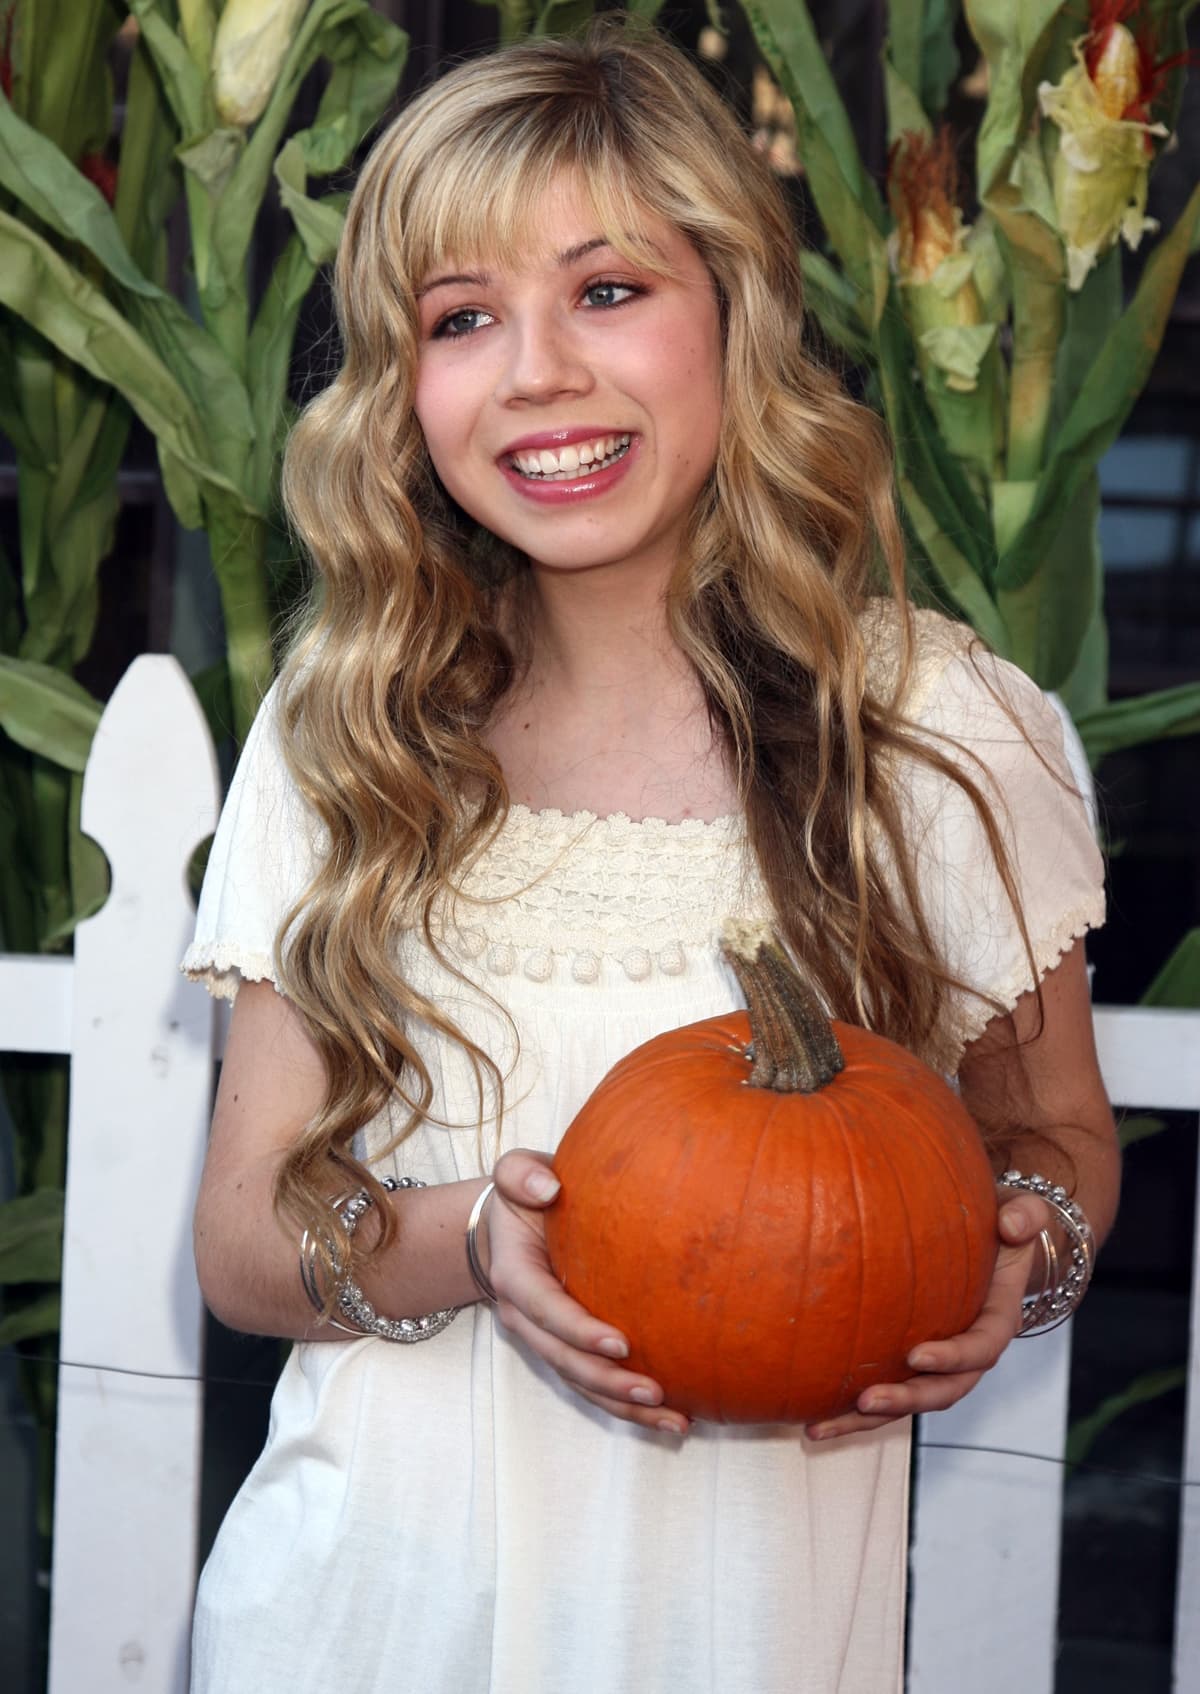 Jennette McCurdy says she was forced by her mom to become a child actress